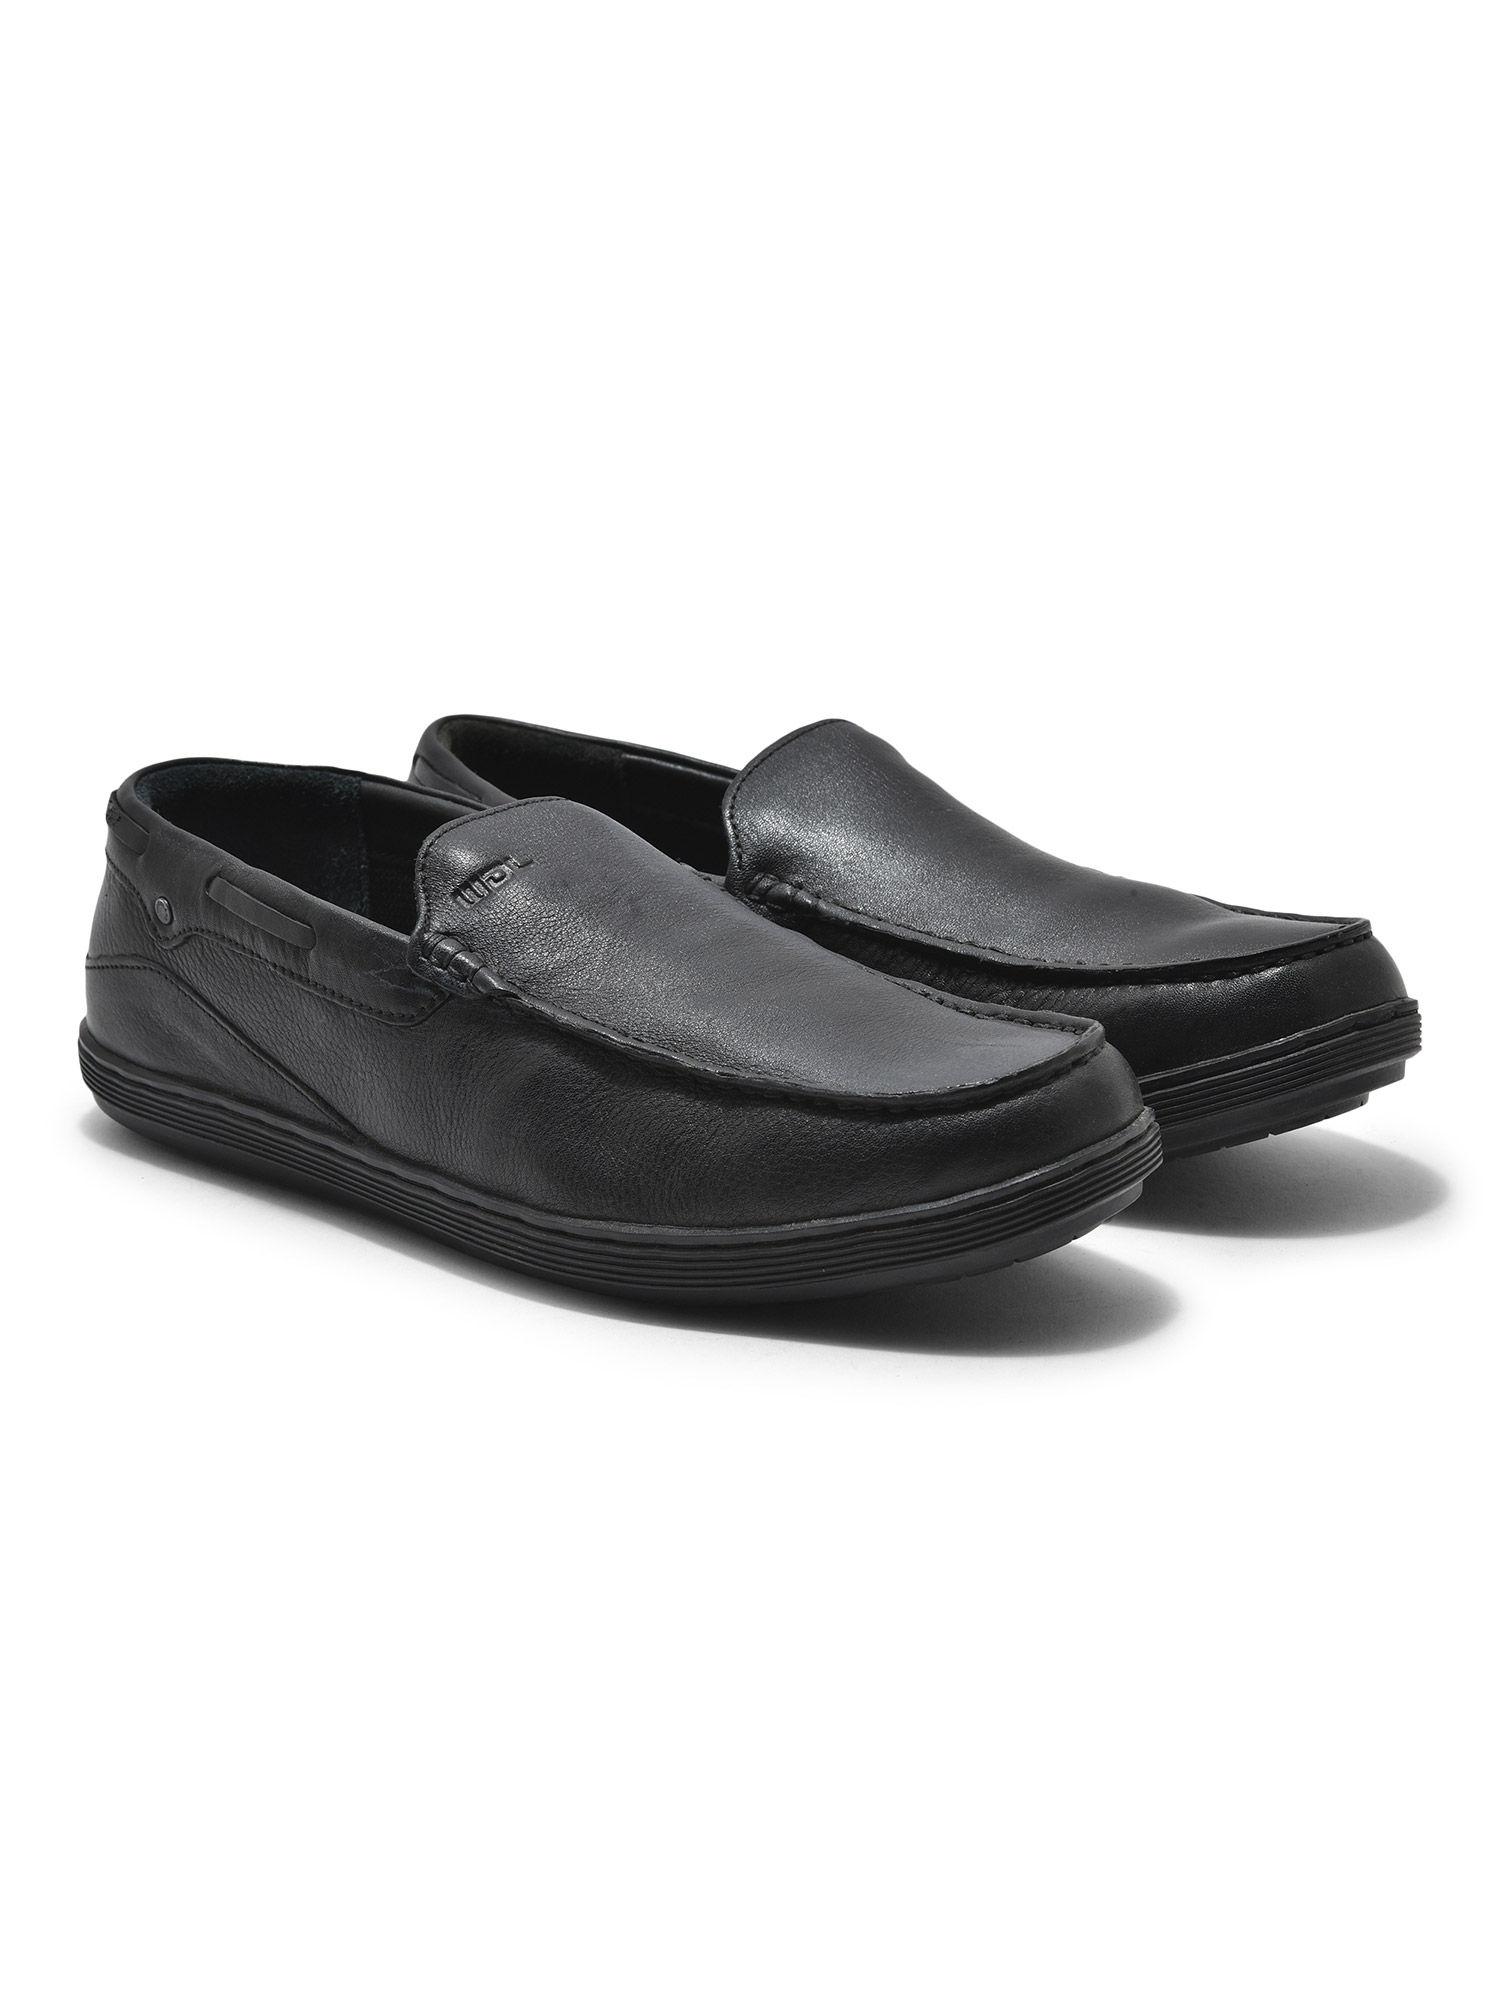 mens-black-casual-shoes-loafers